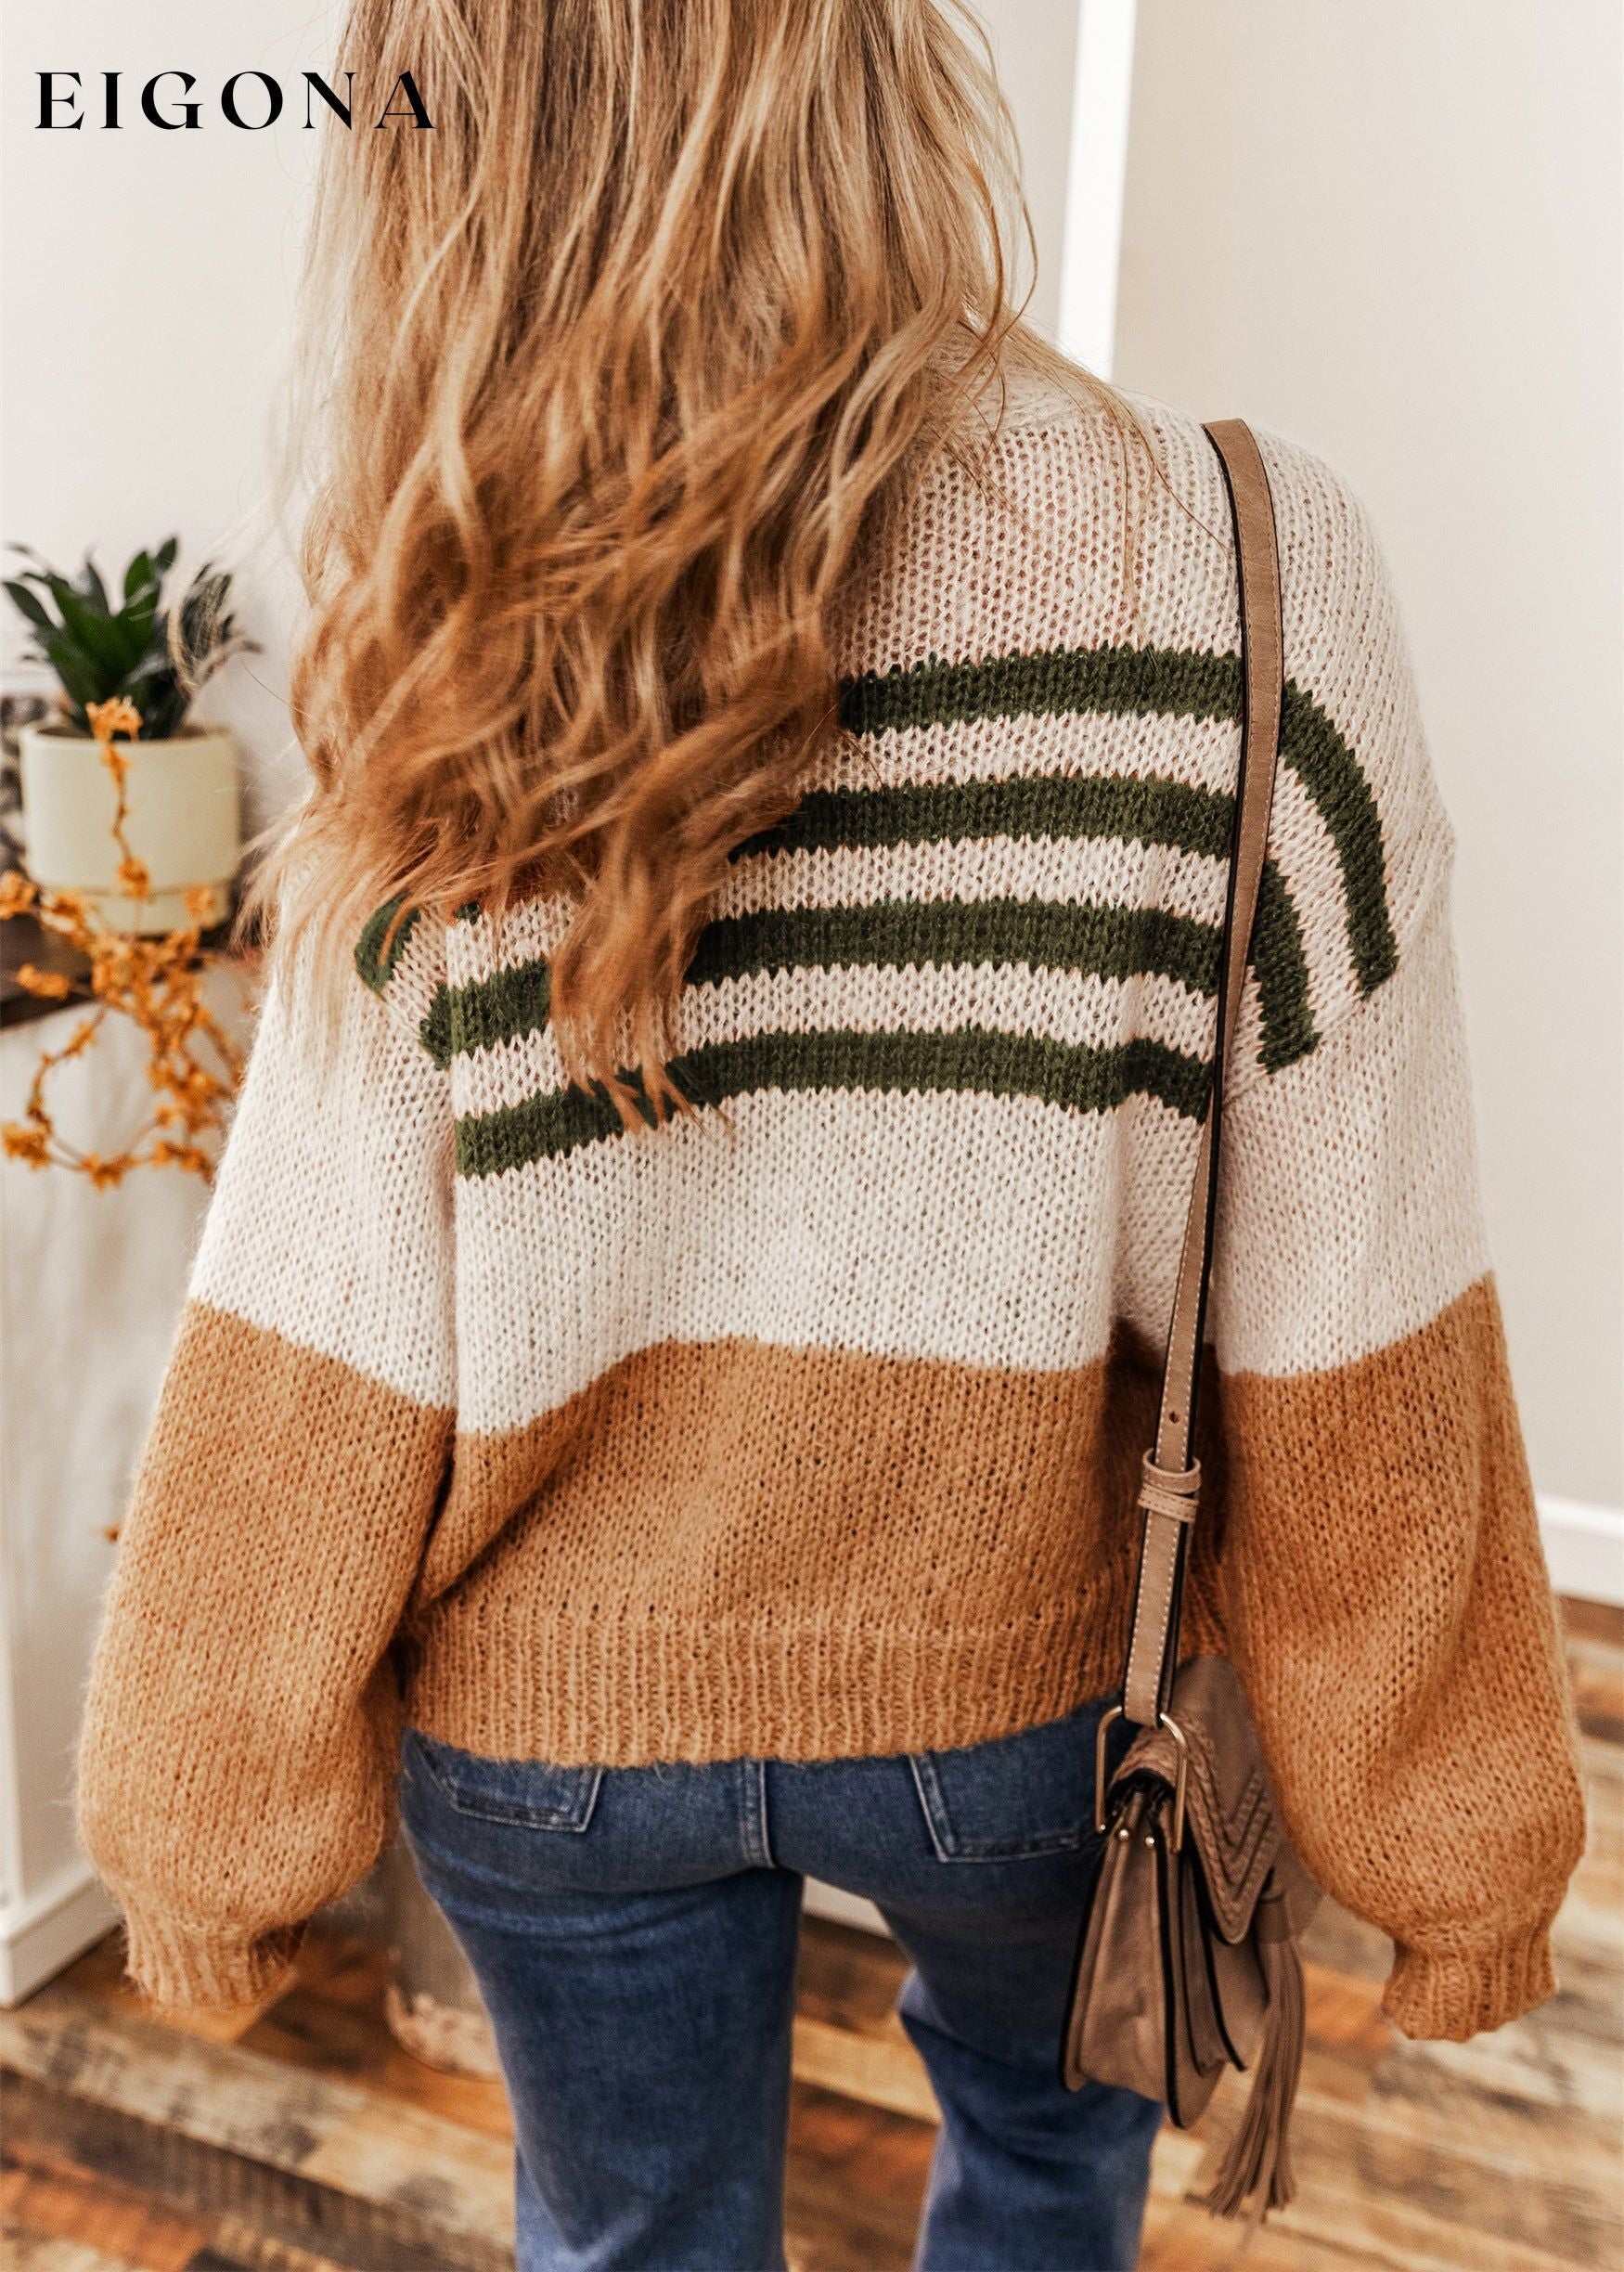 Camel Colorblock Striped Open Cardigan cardigan cardigans clothes DL Chic DL Exclusive EDM Monthly Recomend Print Color Block Season Winter Sweater sweaters Sweatshirt